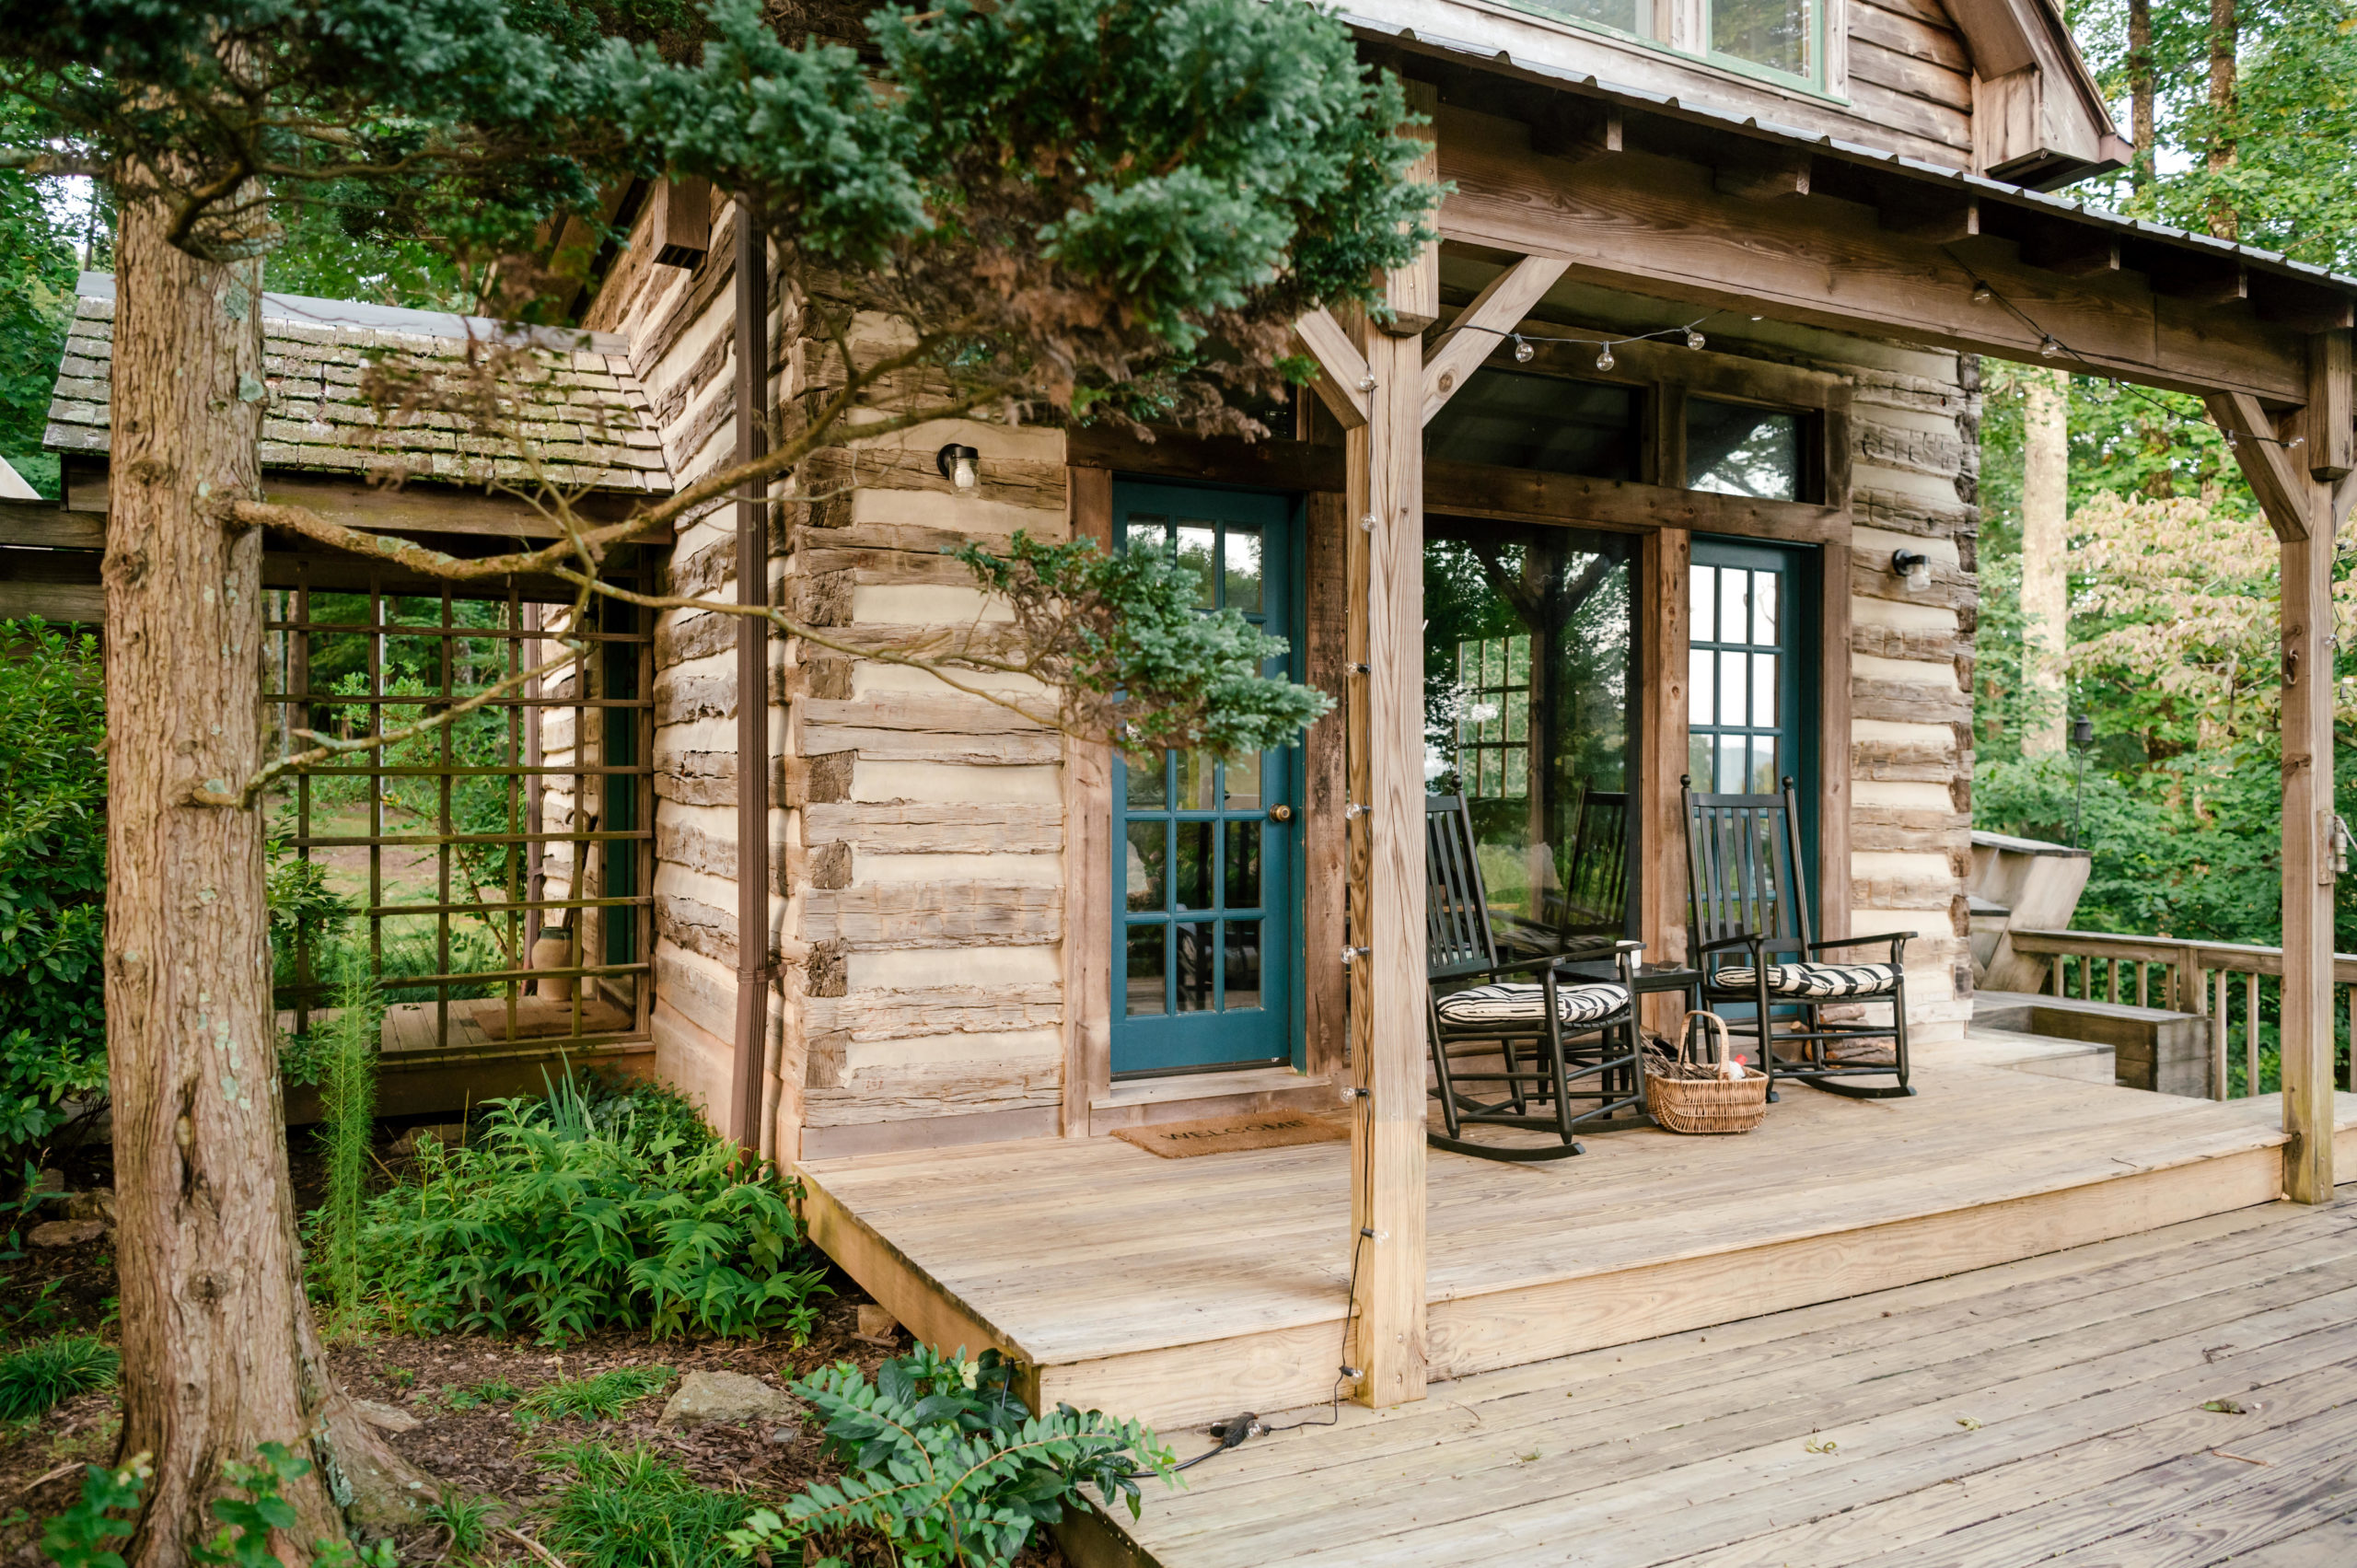 Professional air bnb photography of beautiful Cherry mountain cabin with greenery and chairs sitting on the front porch